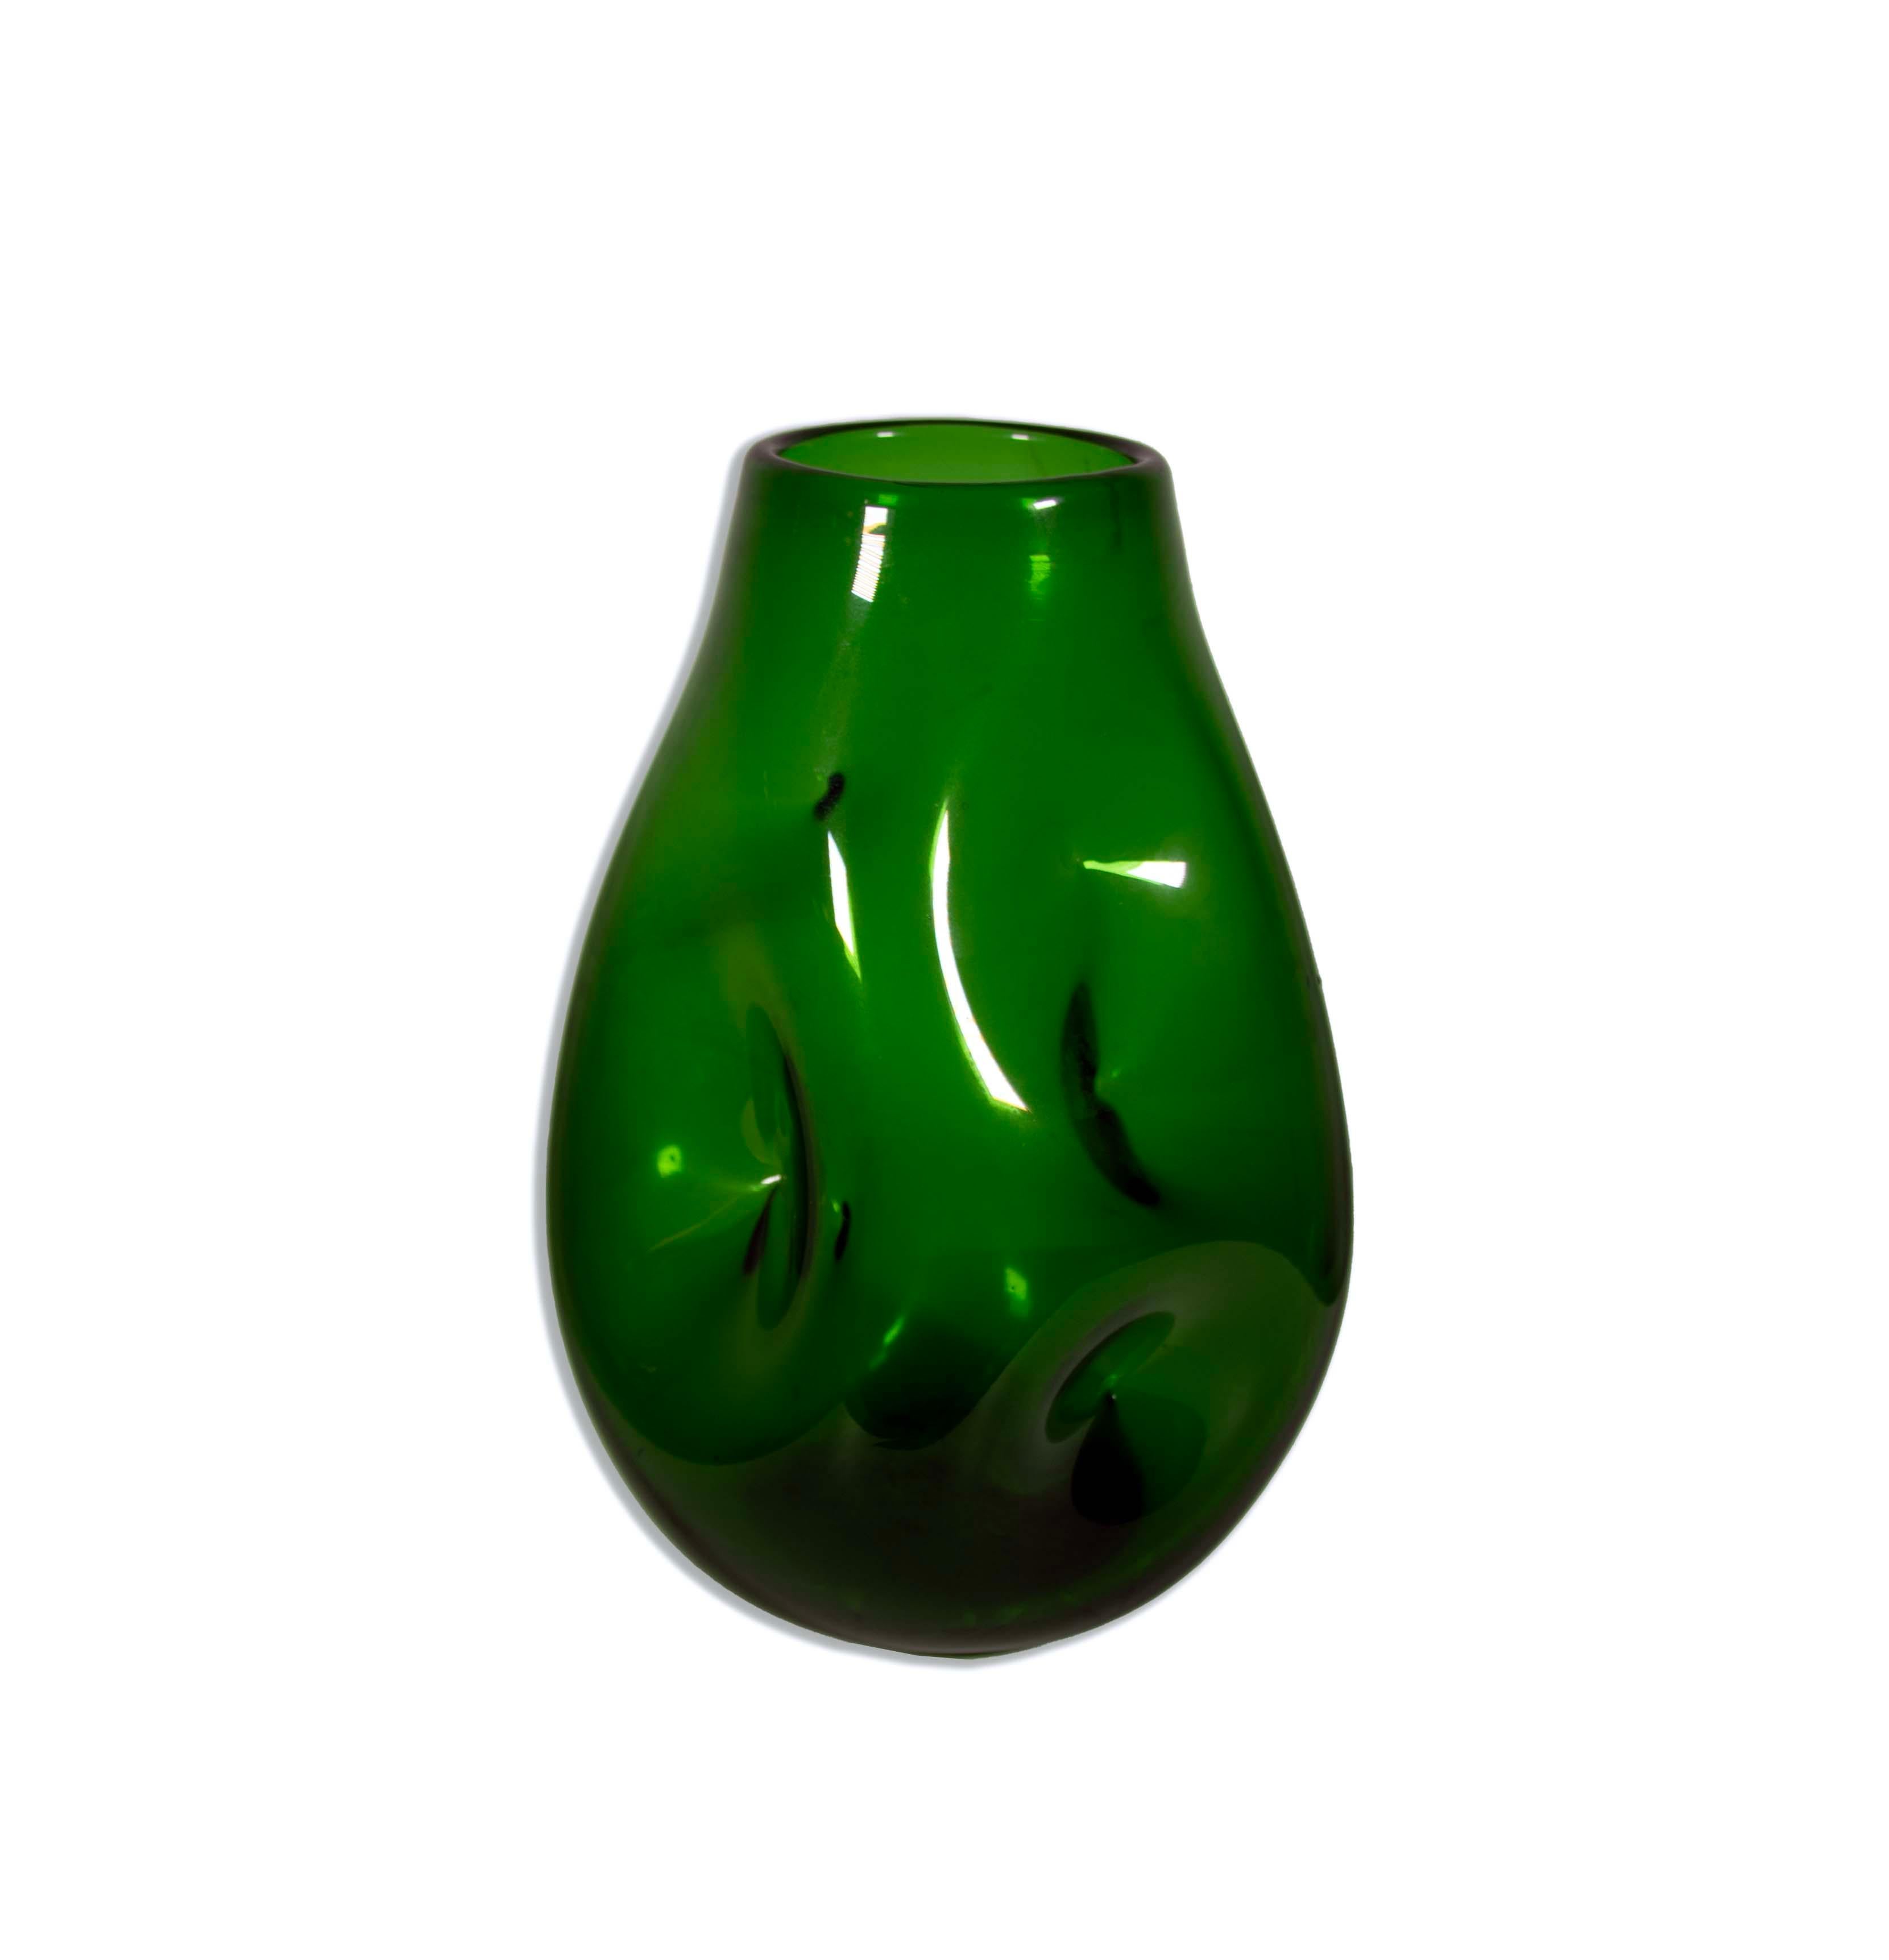 The Blenko Emerald Green Pinched Glass Vase, Model 921L, is a remarkable piece of mid-century modern glass artistry. Crafted by the renowned Blenko Glass Company, this vase features a captivating, pinched form in a beautiful emerald green hue.